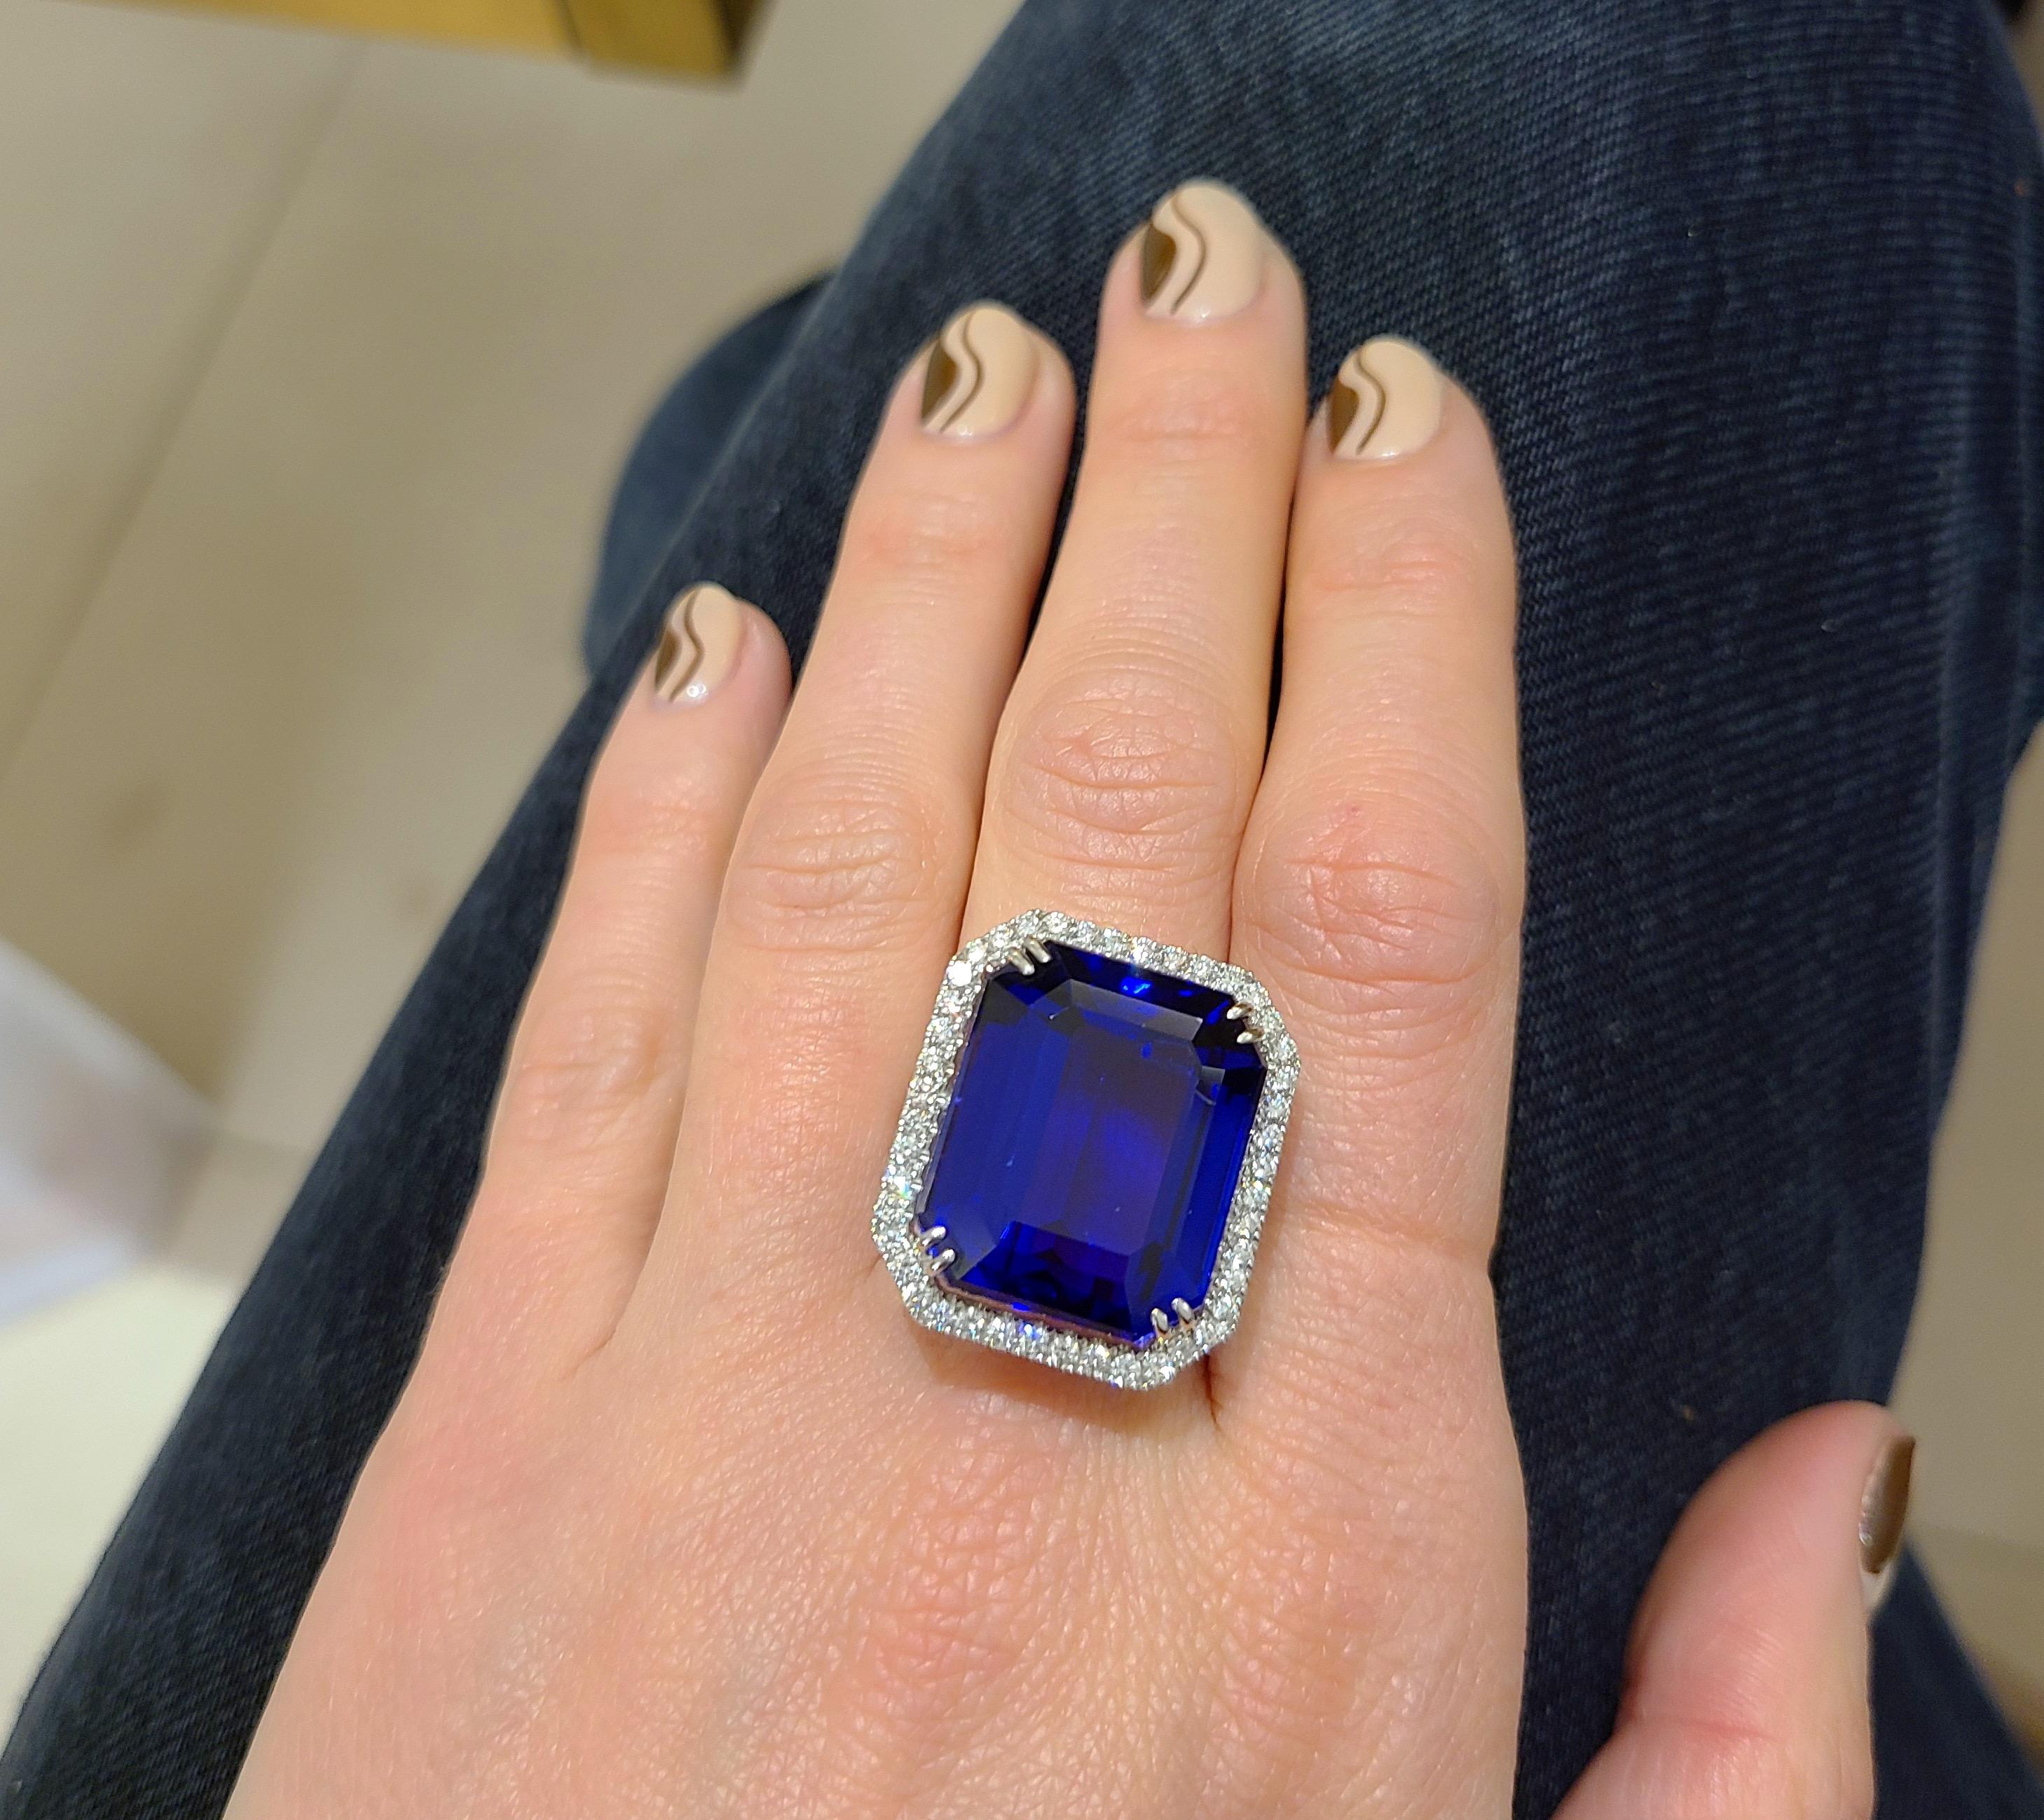 This amazing emerald cut tanzanite center stone ring  is edged with round brilliant-cut diamonds and diamonds along 3/4 of the shank. Set in 18-karat white gold.
Diamond weight: approximately 1.45 carats total.
Tanzanite weight: 32.27 carats.
Ring